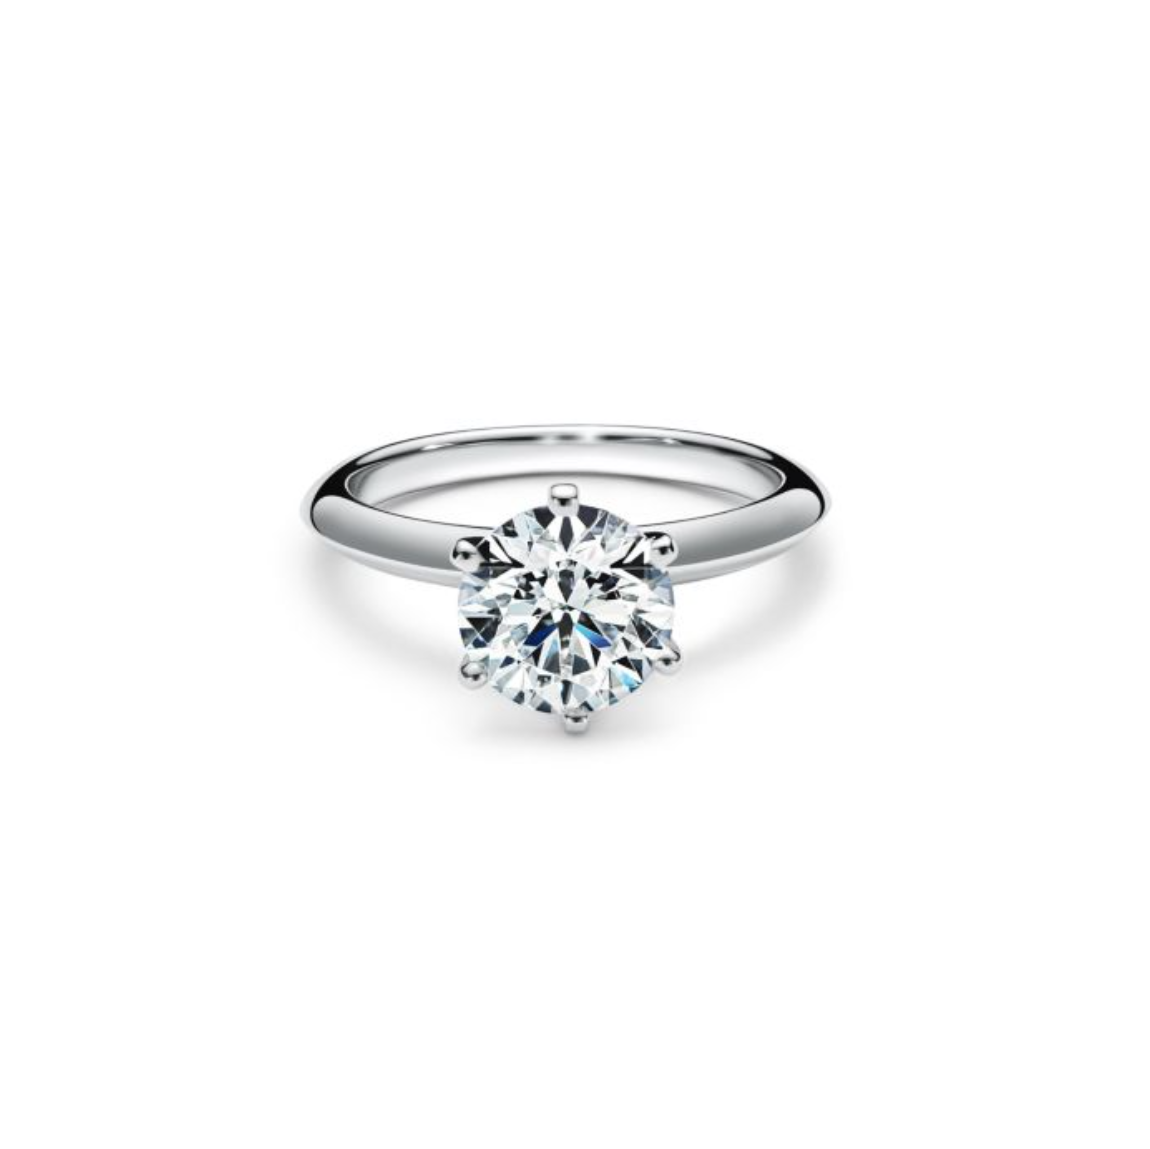 Jewellery Engagement Ring in White Gold Ringer